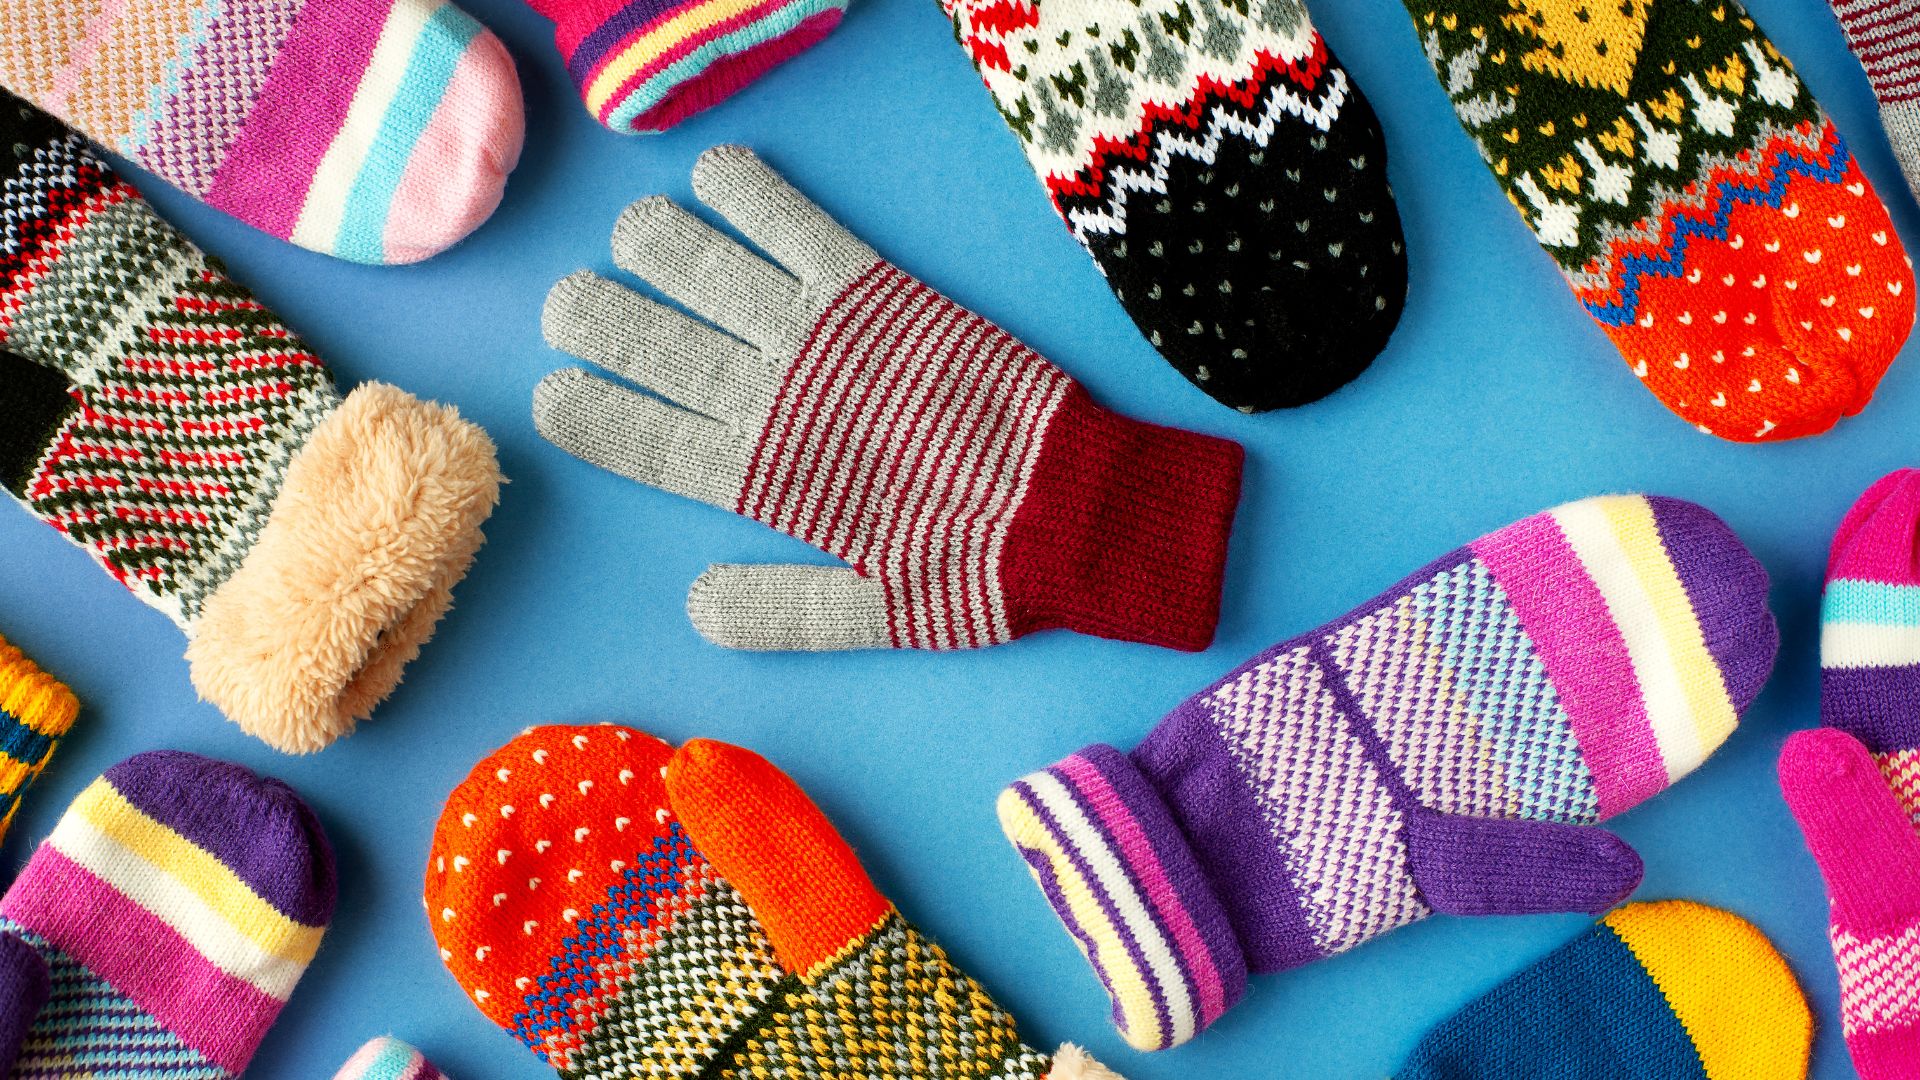 Generic gloves and mittens. (Canva)